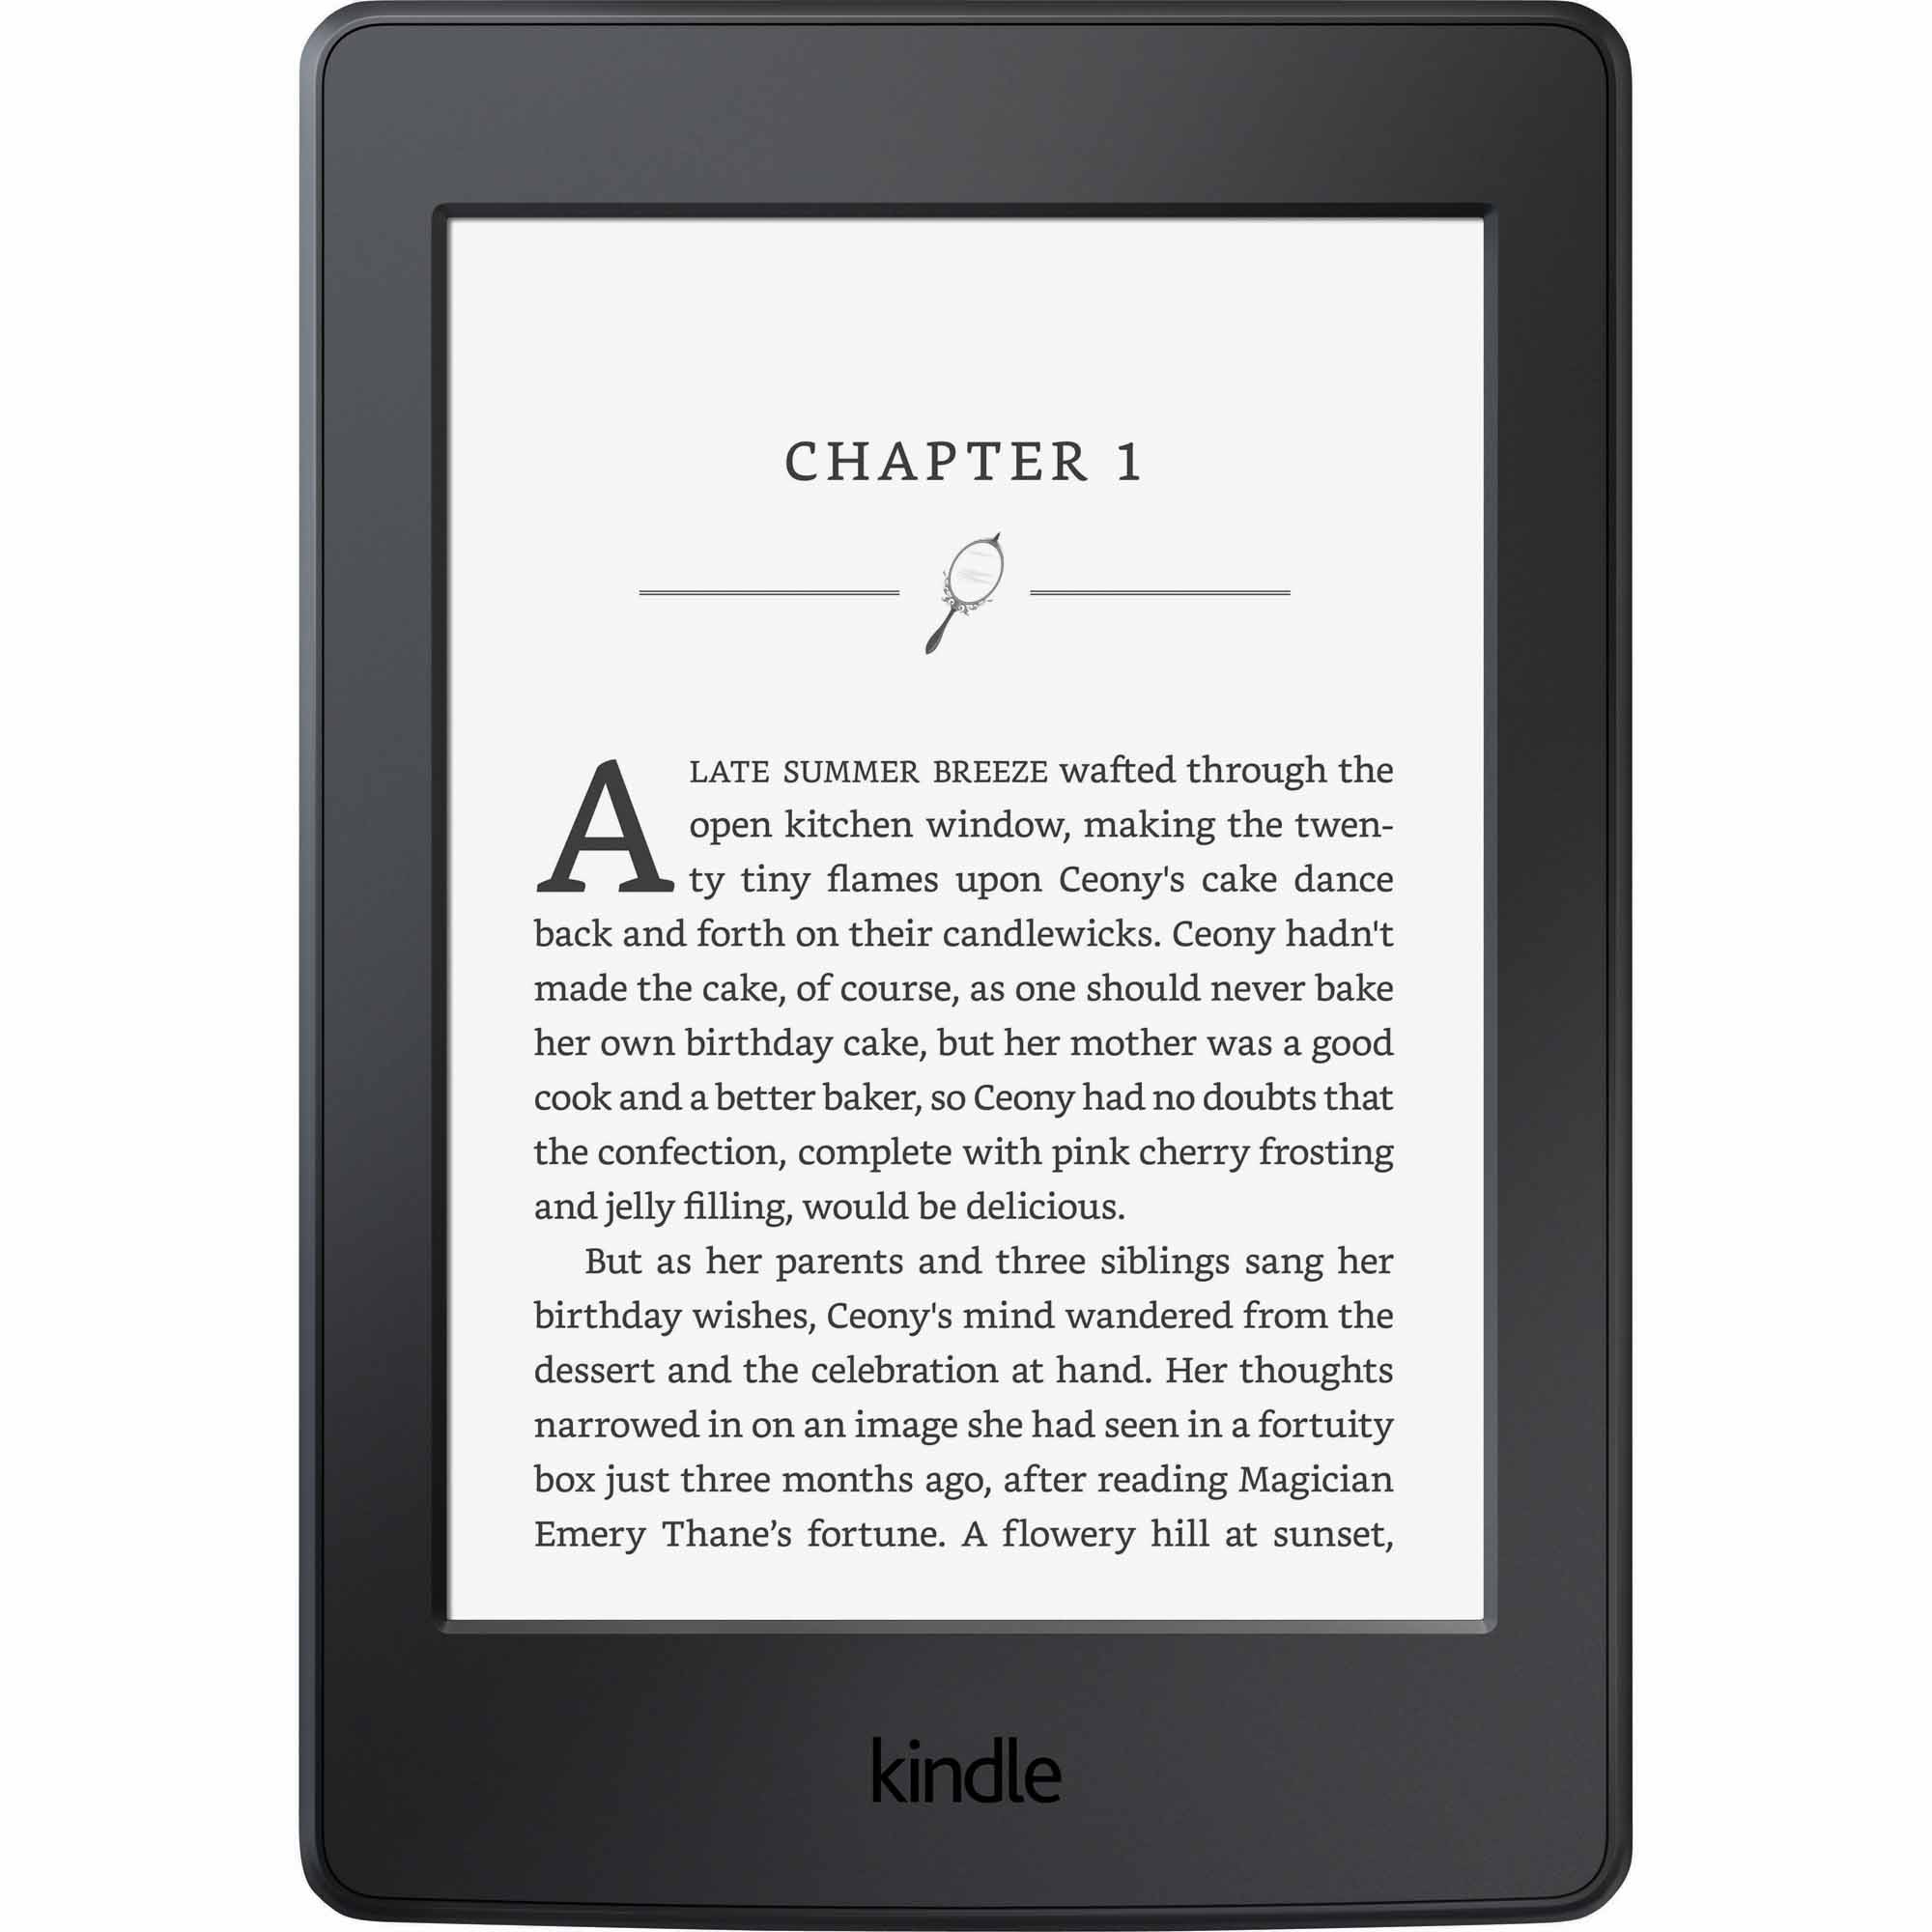 Amazon B00OQVZDJM Kindle Paperwhite 4GB Reader with Wifi